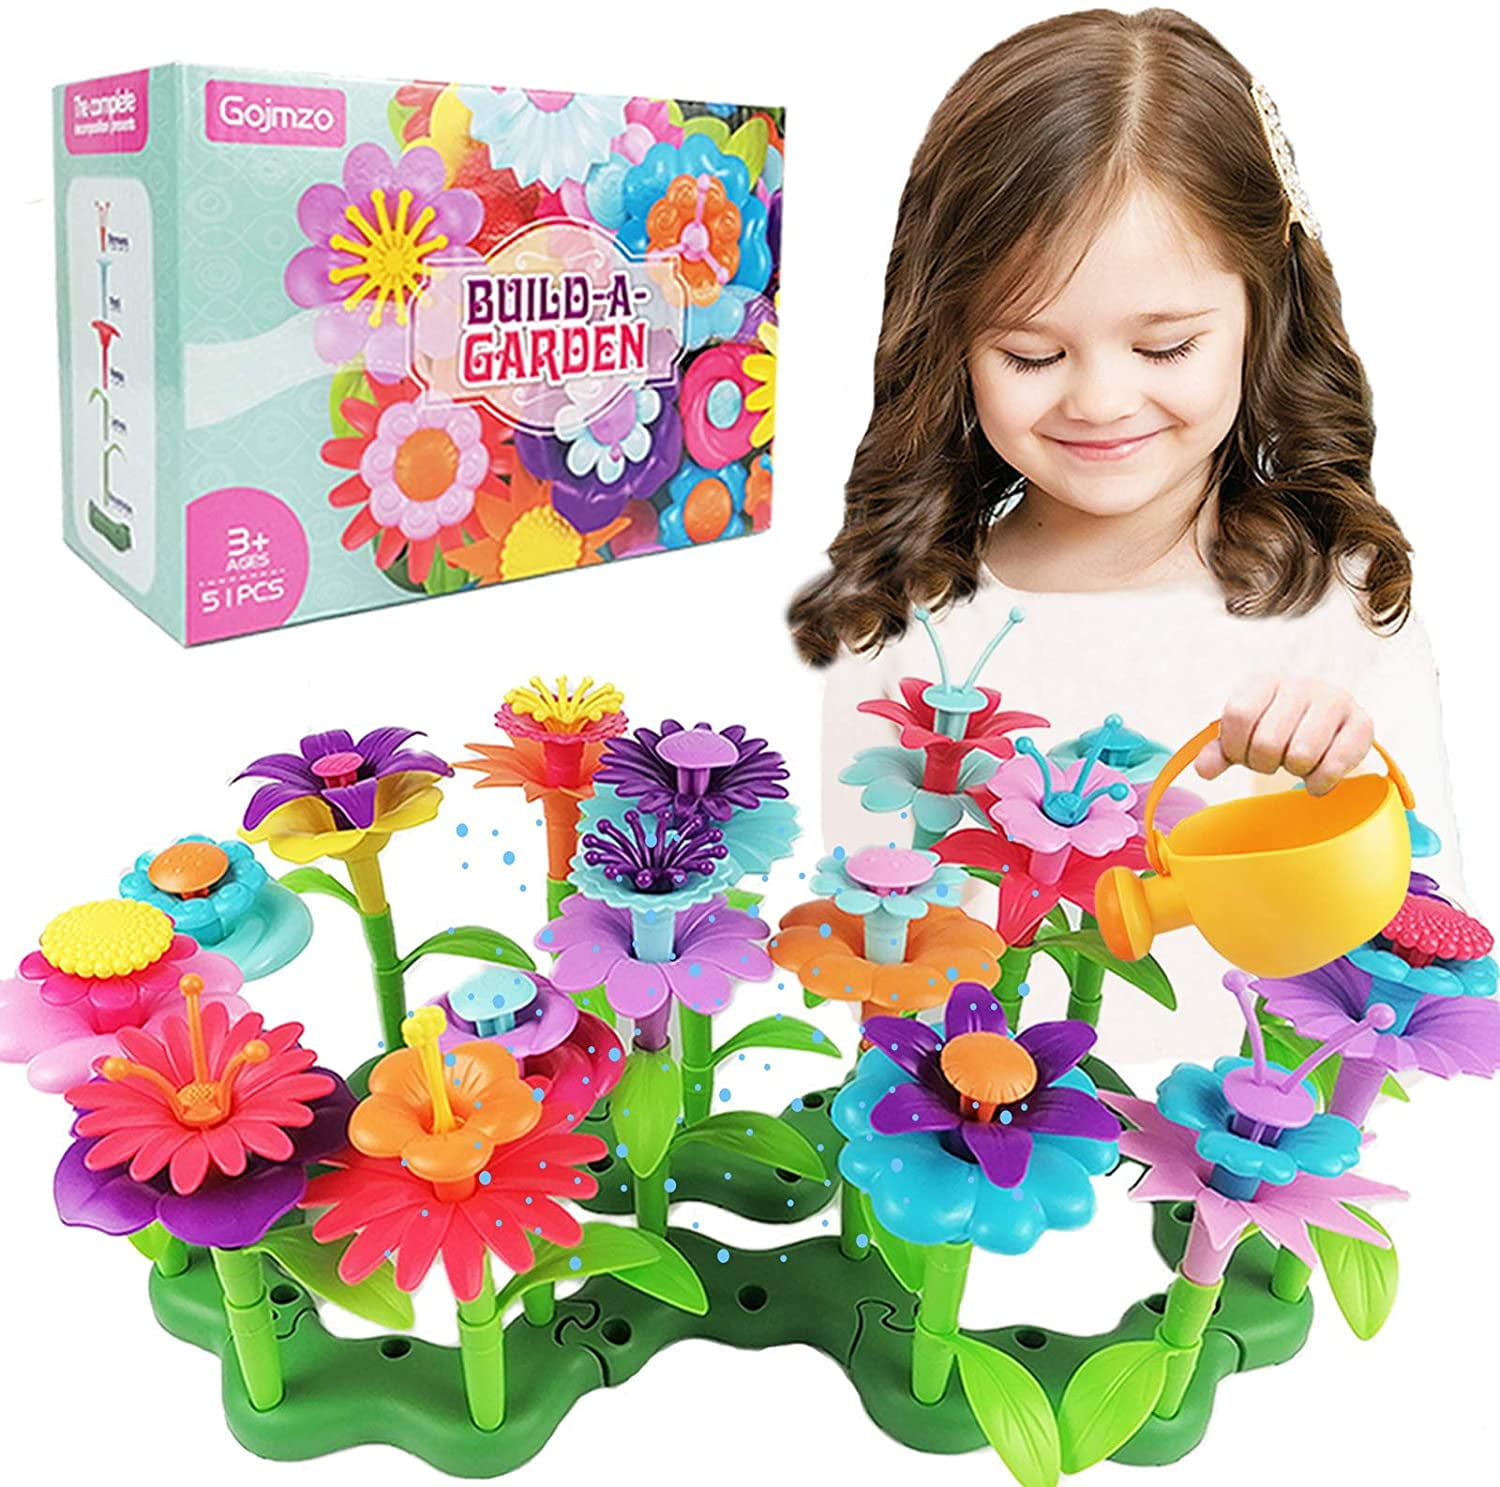 Flower Garden Building Set 3-6 Year Old Girls Toddlers Kids Christmas Gift Toy 